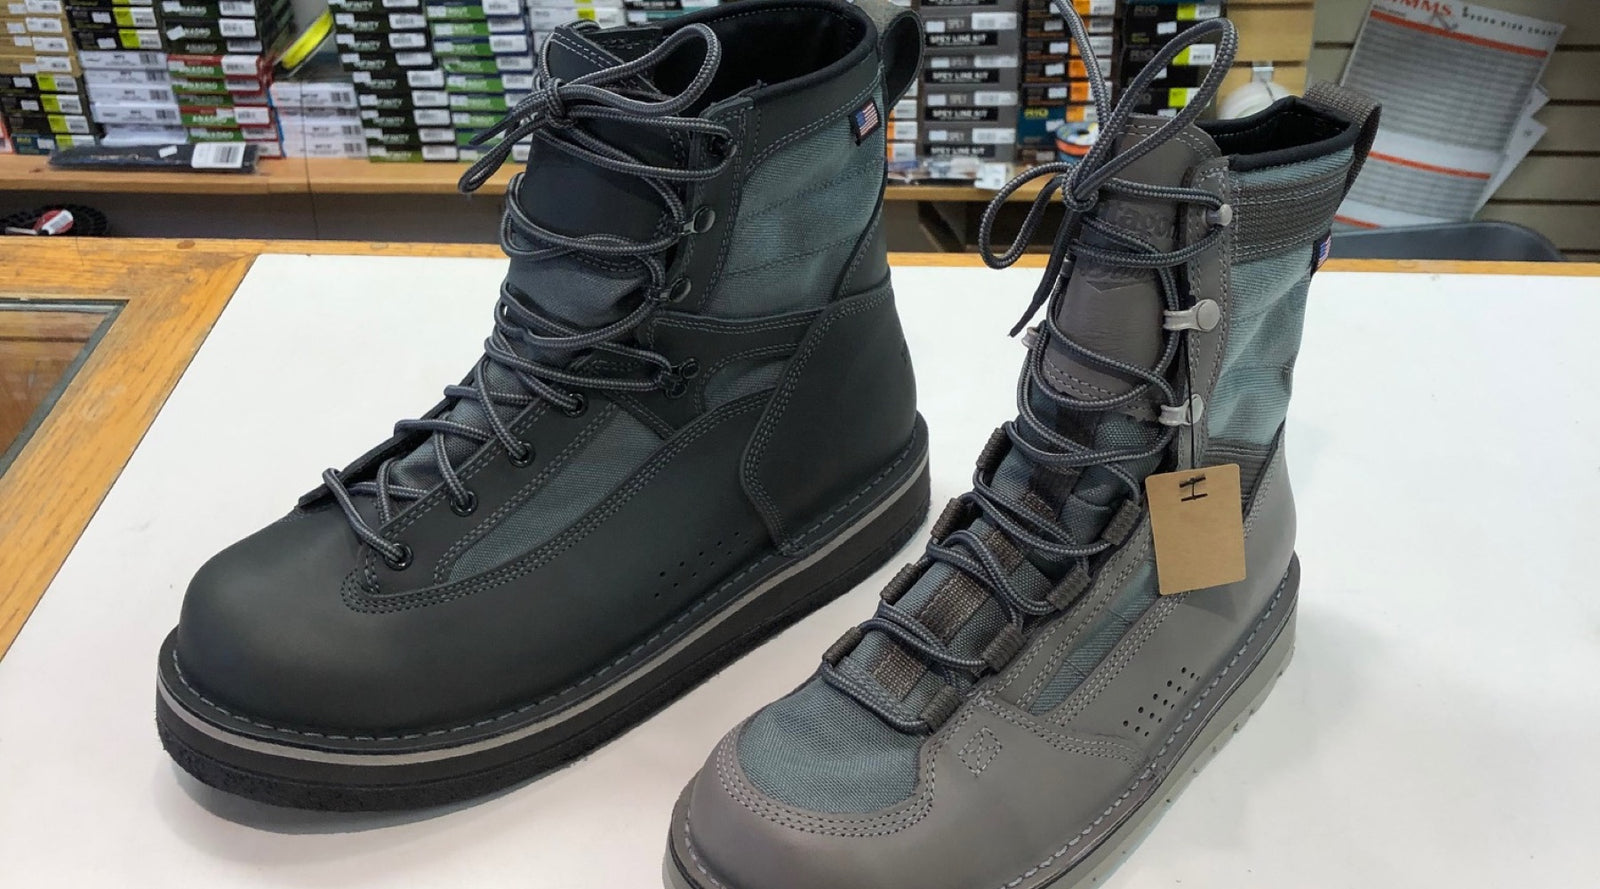 Gear Review: The Patagonia Danner Wading Boot - The Compleat Angler